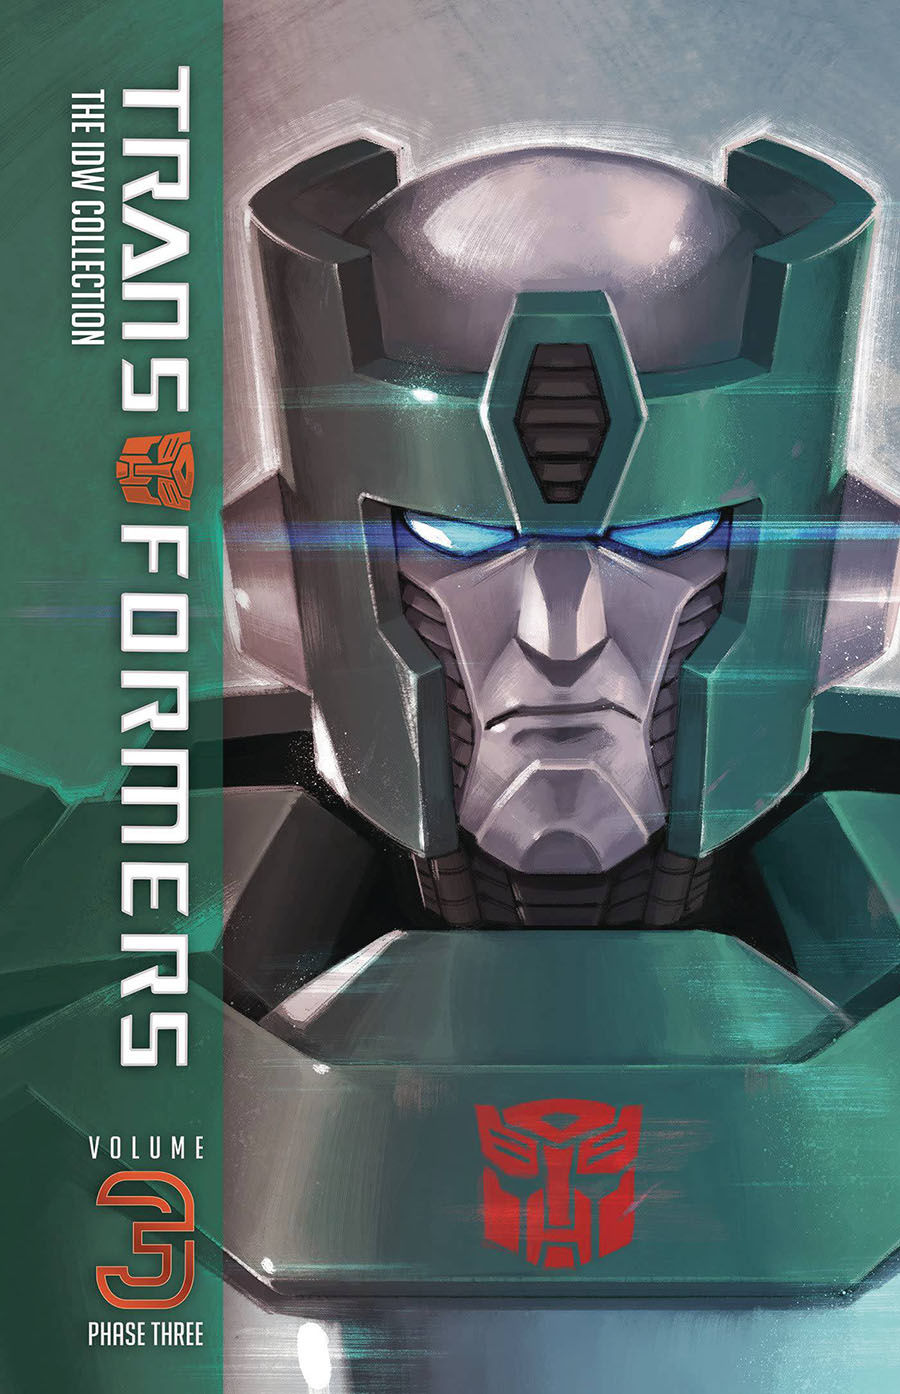 Transformers IDW Collection Phase Three Vol 3 HC